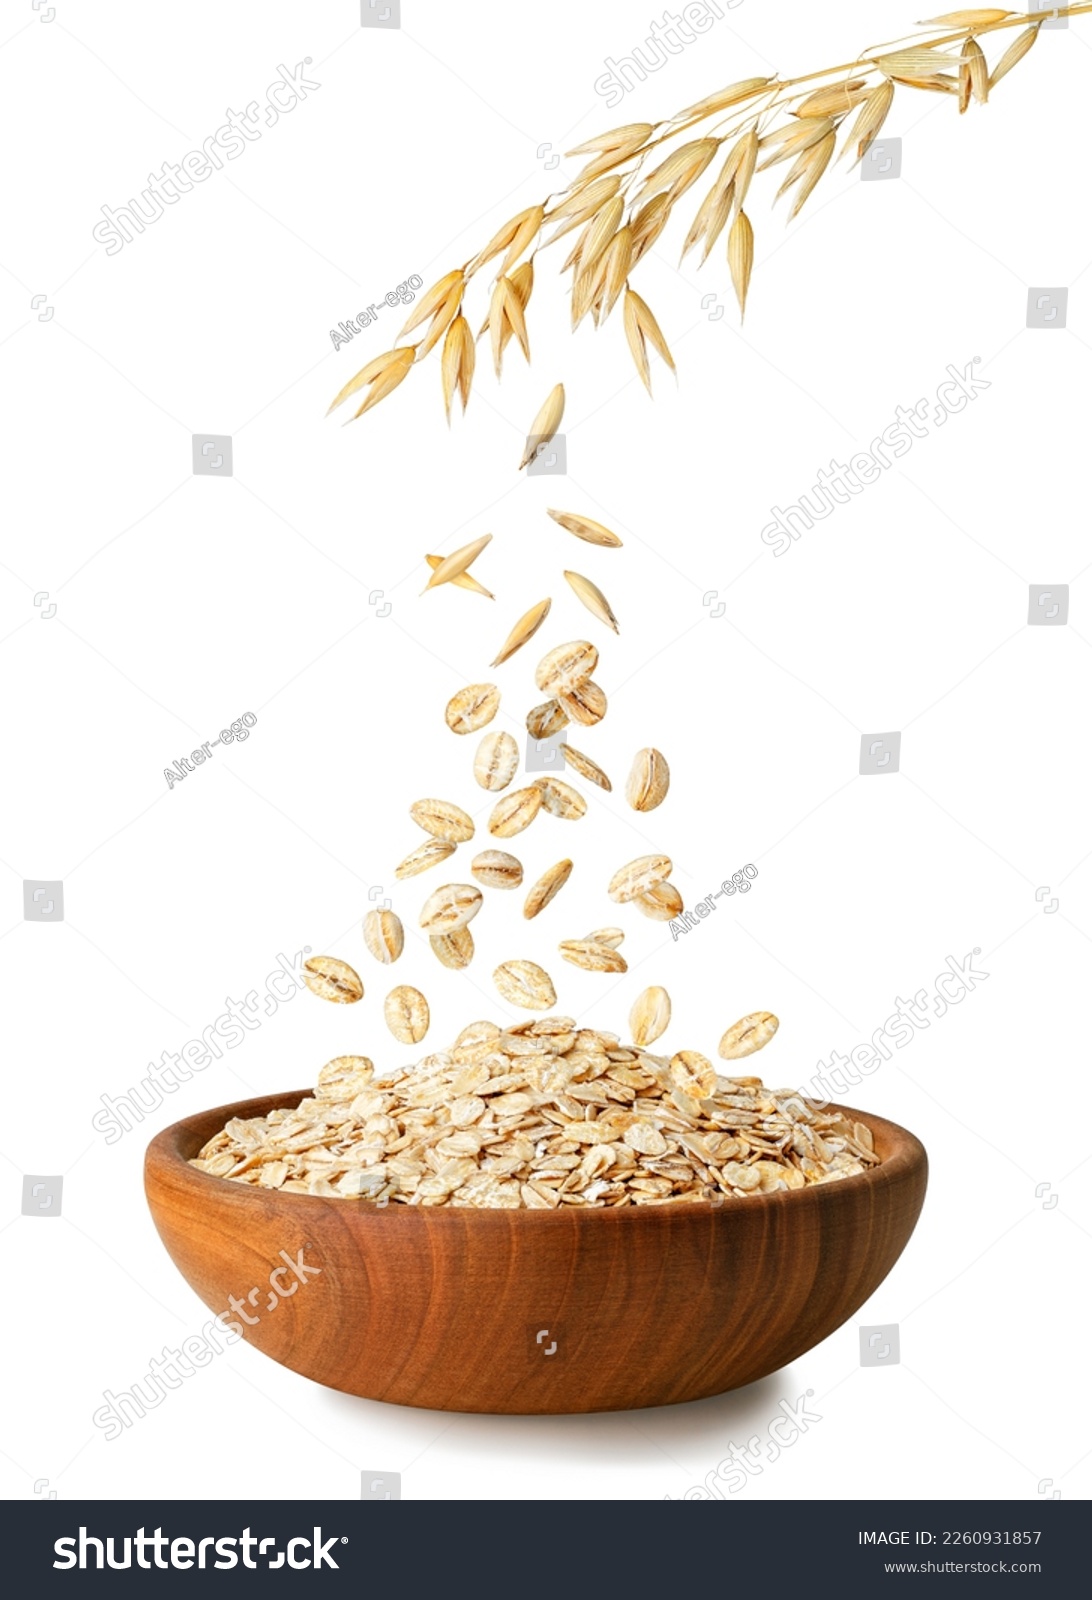 uncooked oatmeal falling from ripe oat ears in wooden bowl isolated on white background #2260931857